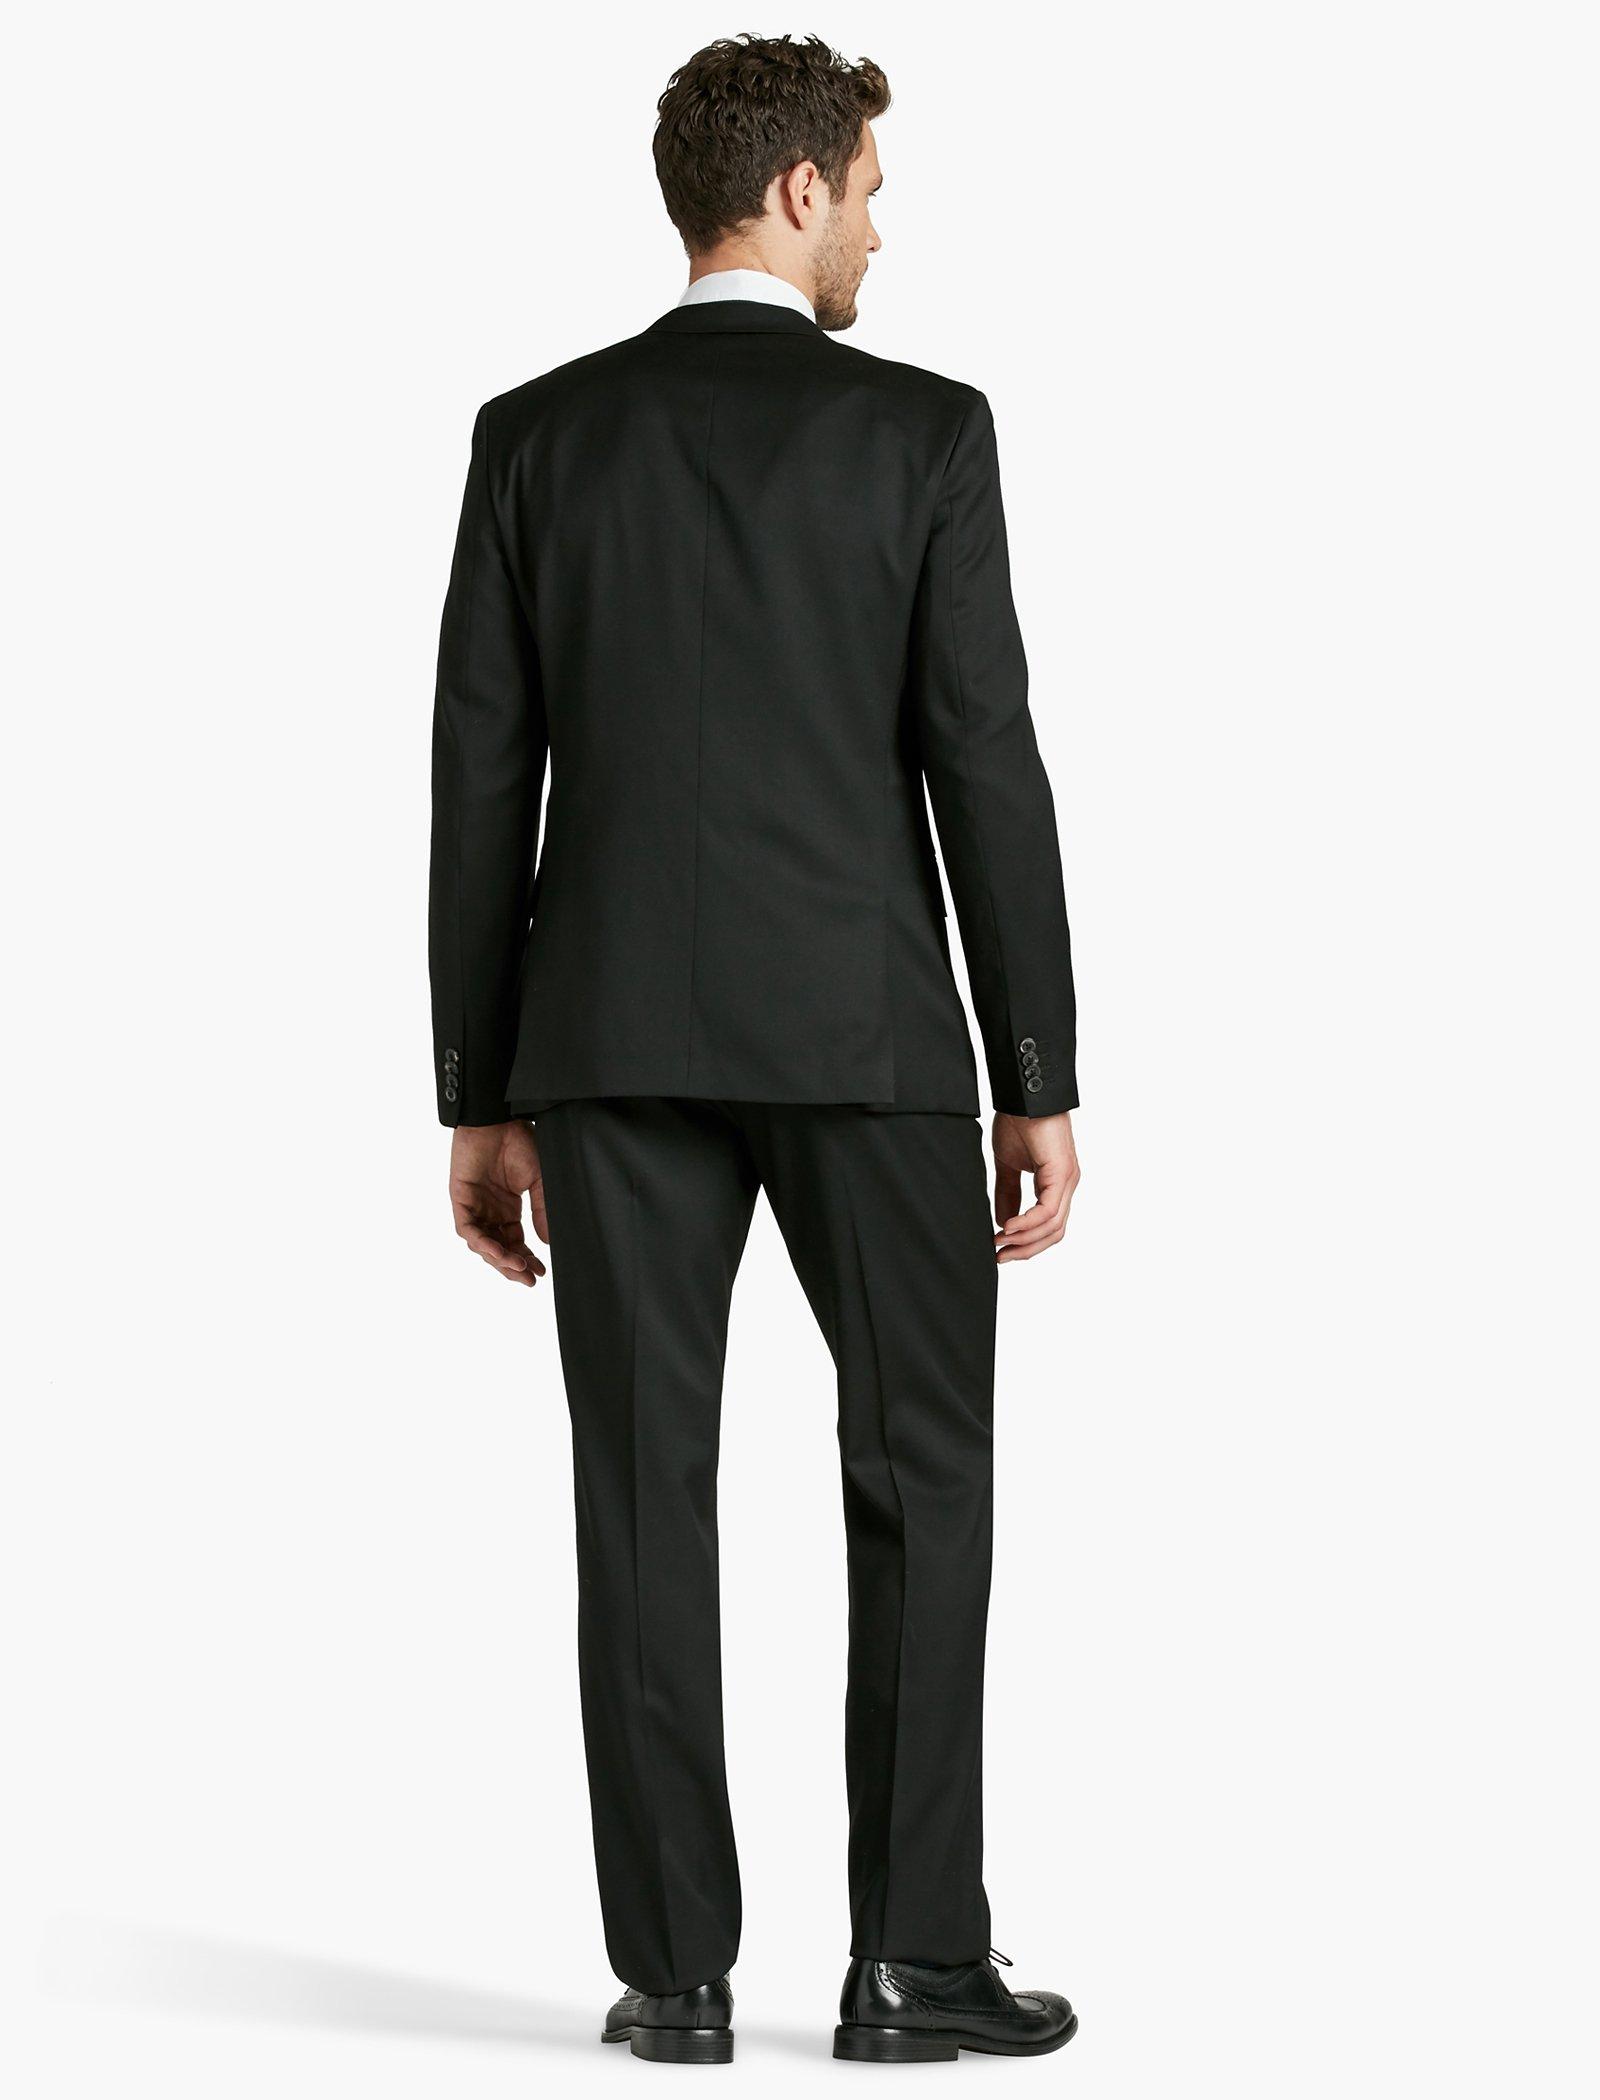 Jack Occasion Suit Jacket | Lucky Brand